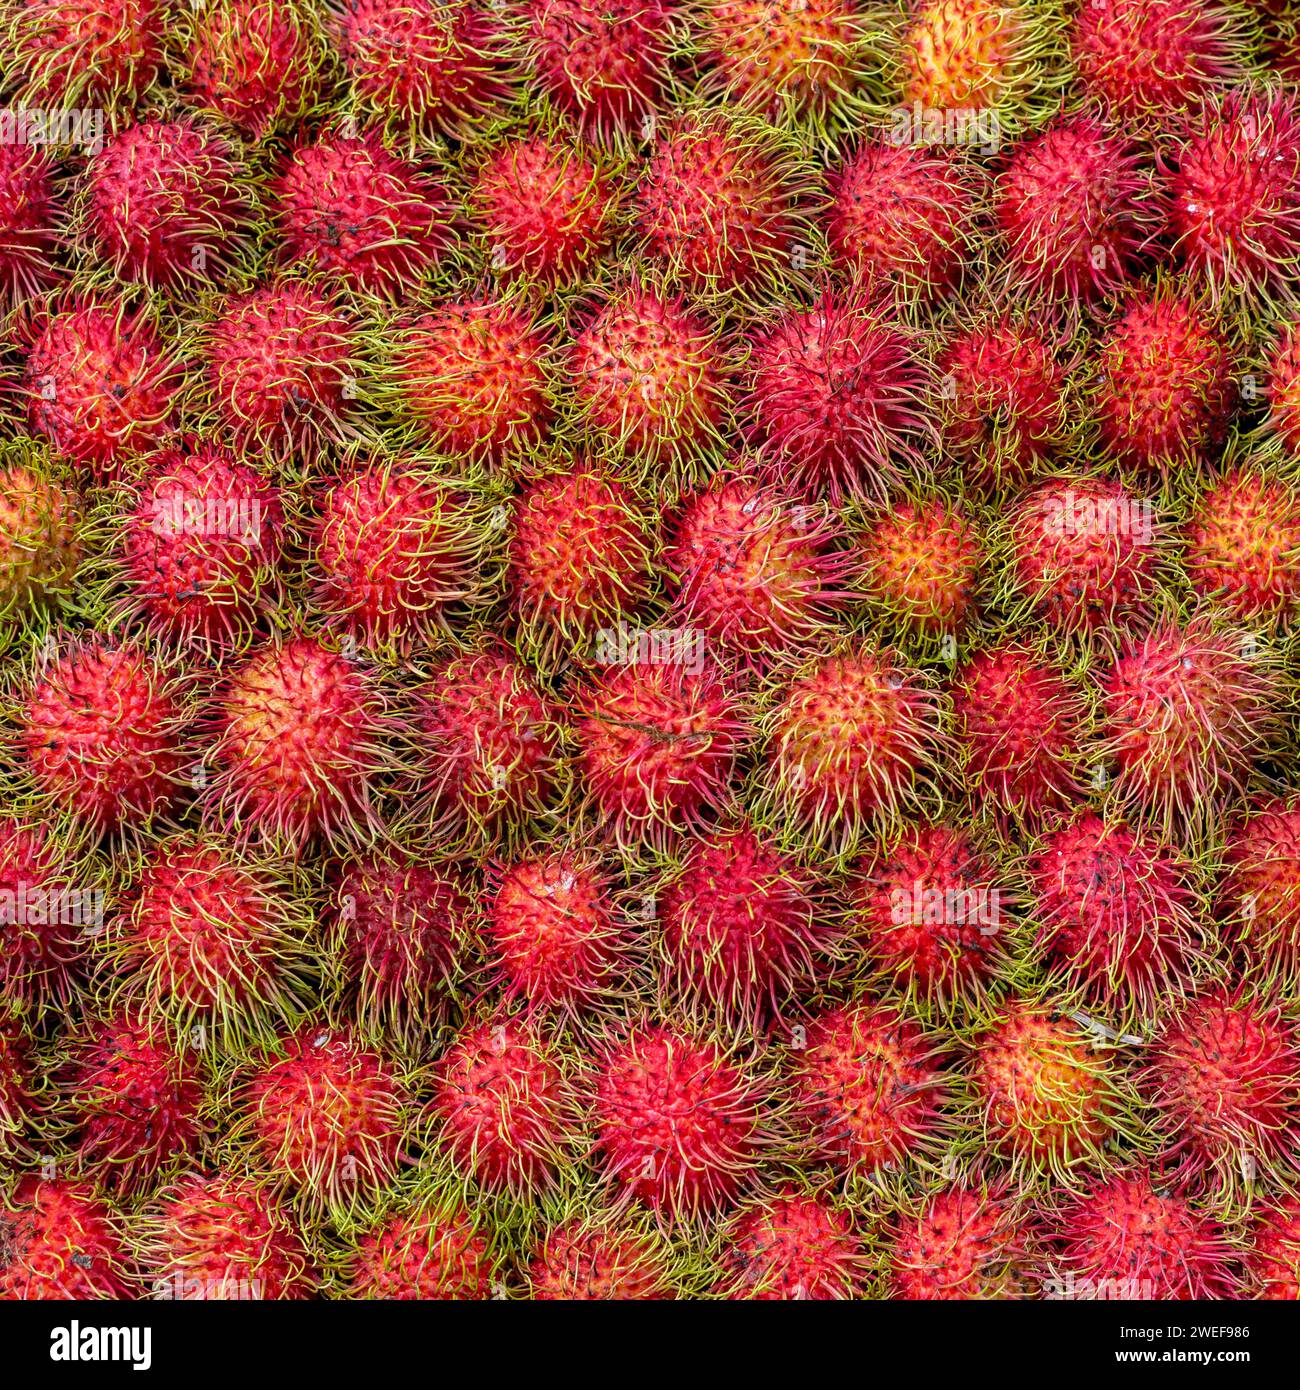 Evenly laid out rambutans. Tropical red fruit background Stock Photo